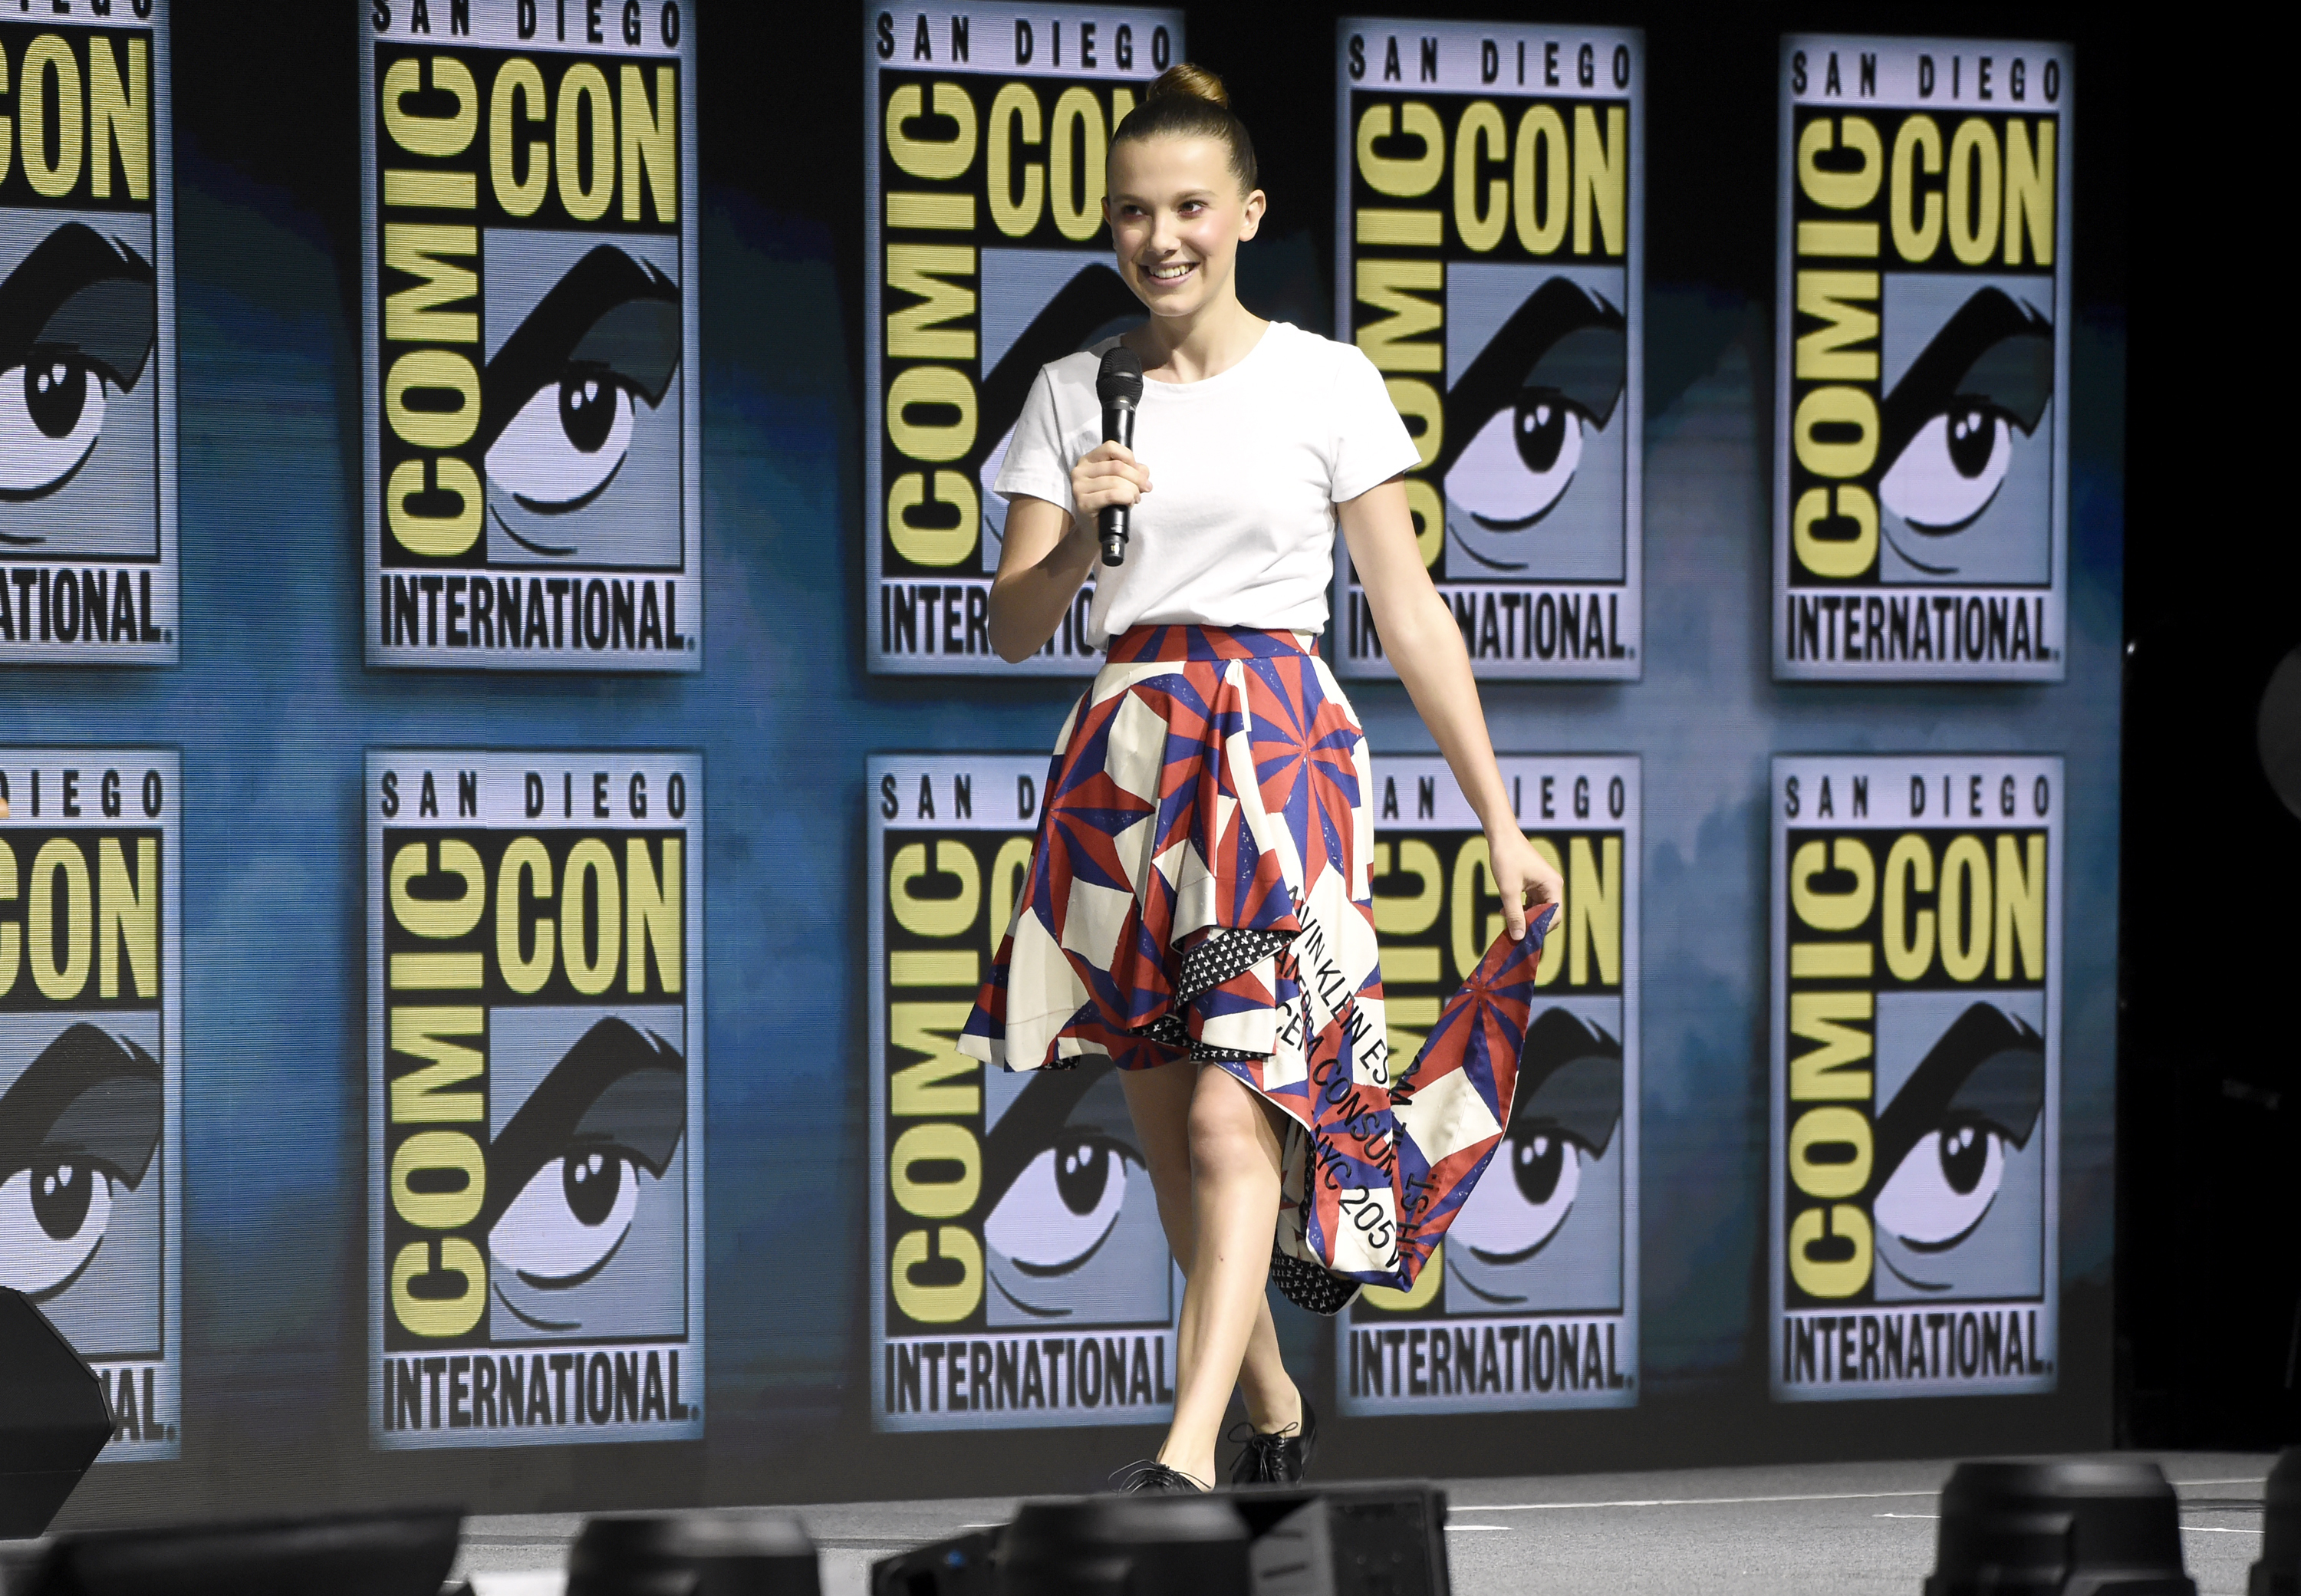 Millie Bobby Brown at Comic-Con International (Chris Pizzello/Invision/AP)